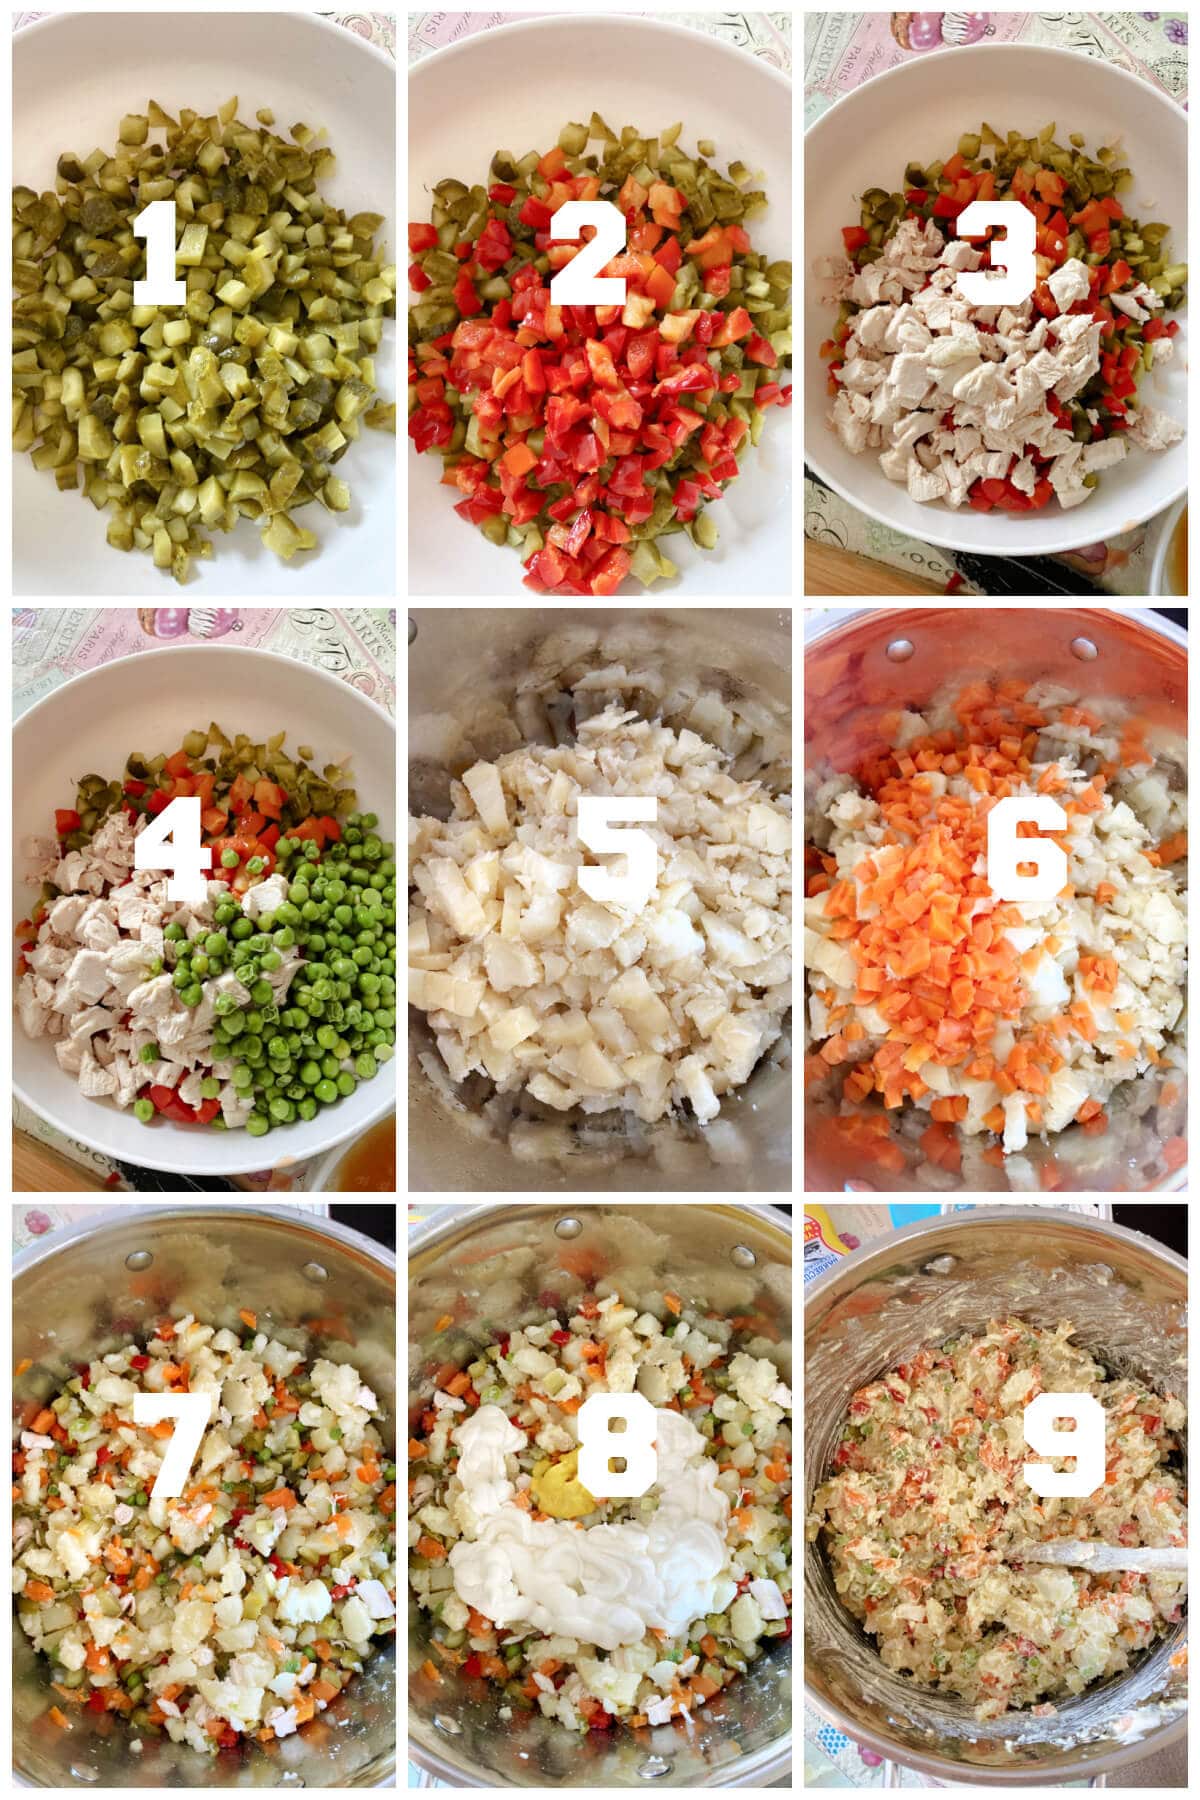 Collage of 9 photos to show how to make Russian Salad.